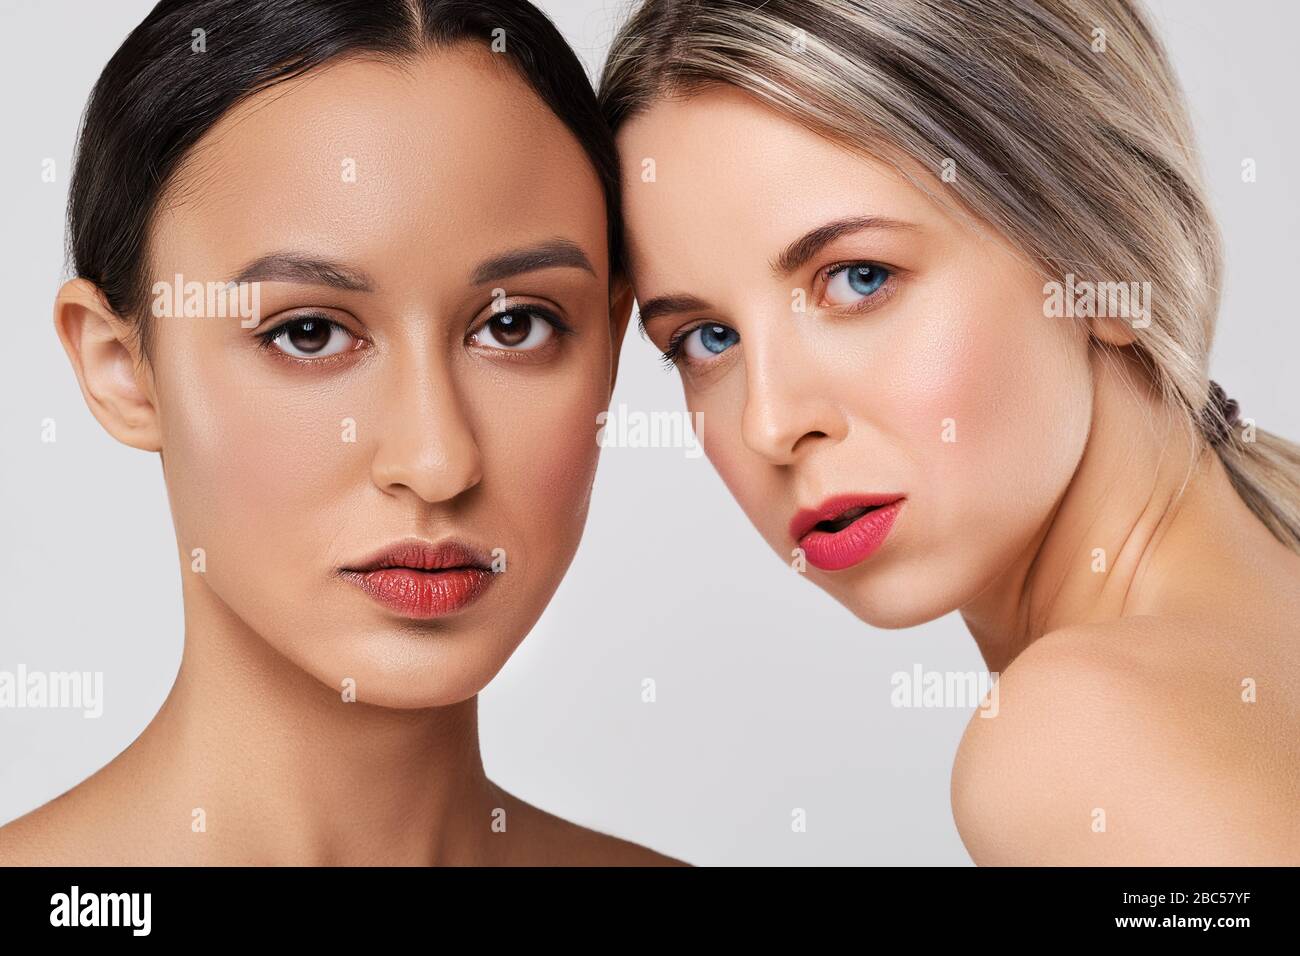 Close up portrait of beautiful caucasian and african girl models with different types of skin. Stock Photo